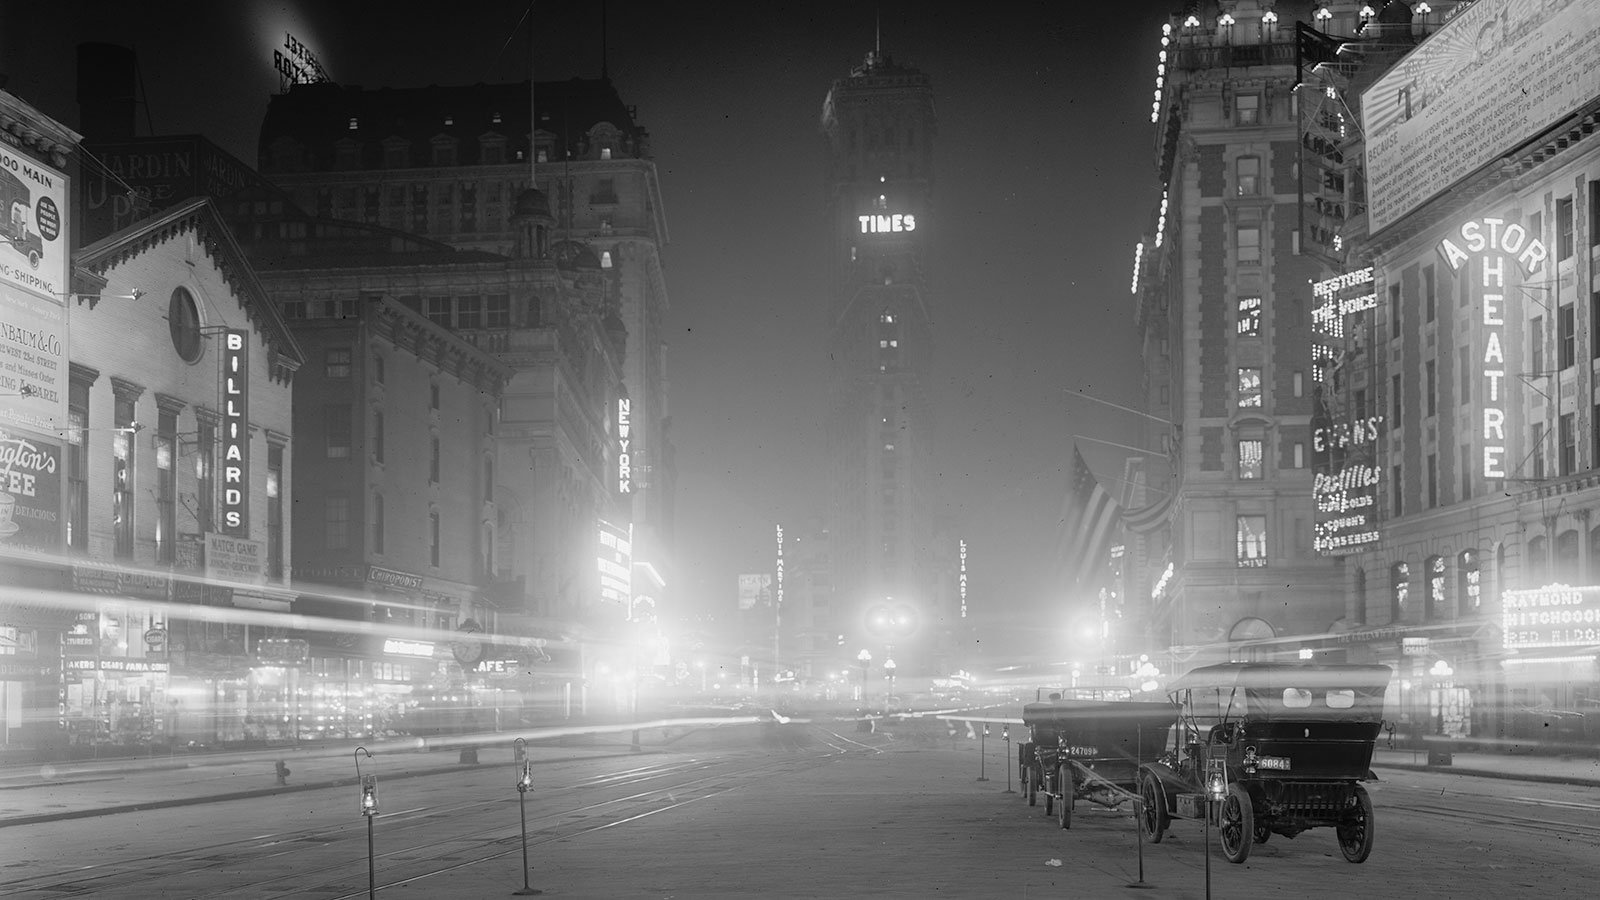 Times Square at night, between 1900 and 1915